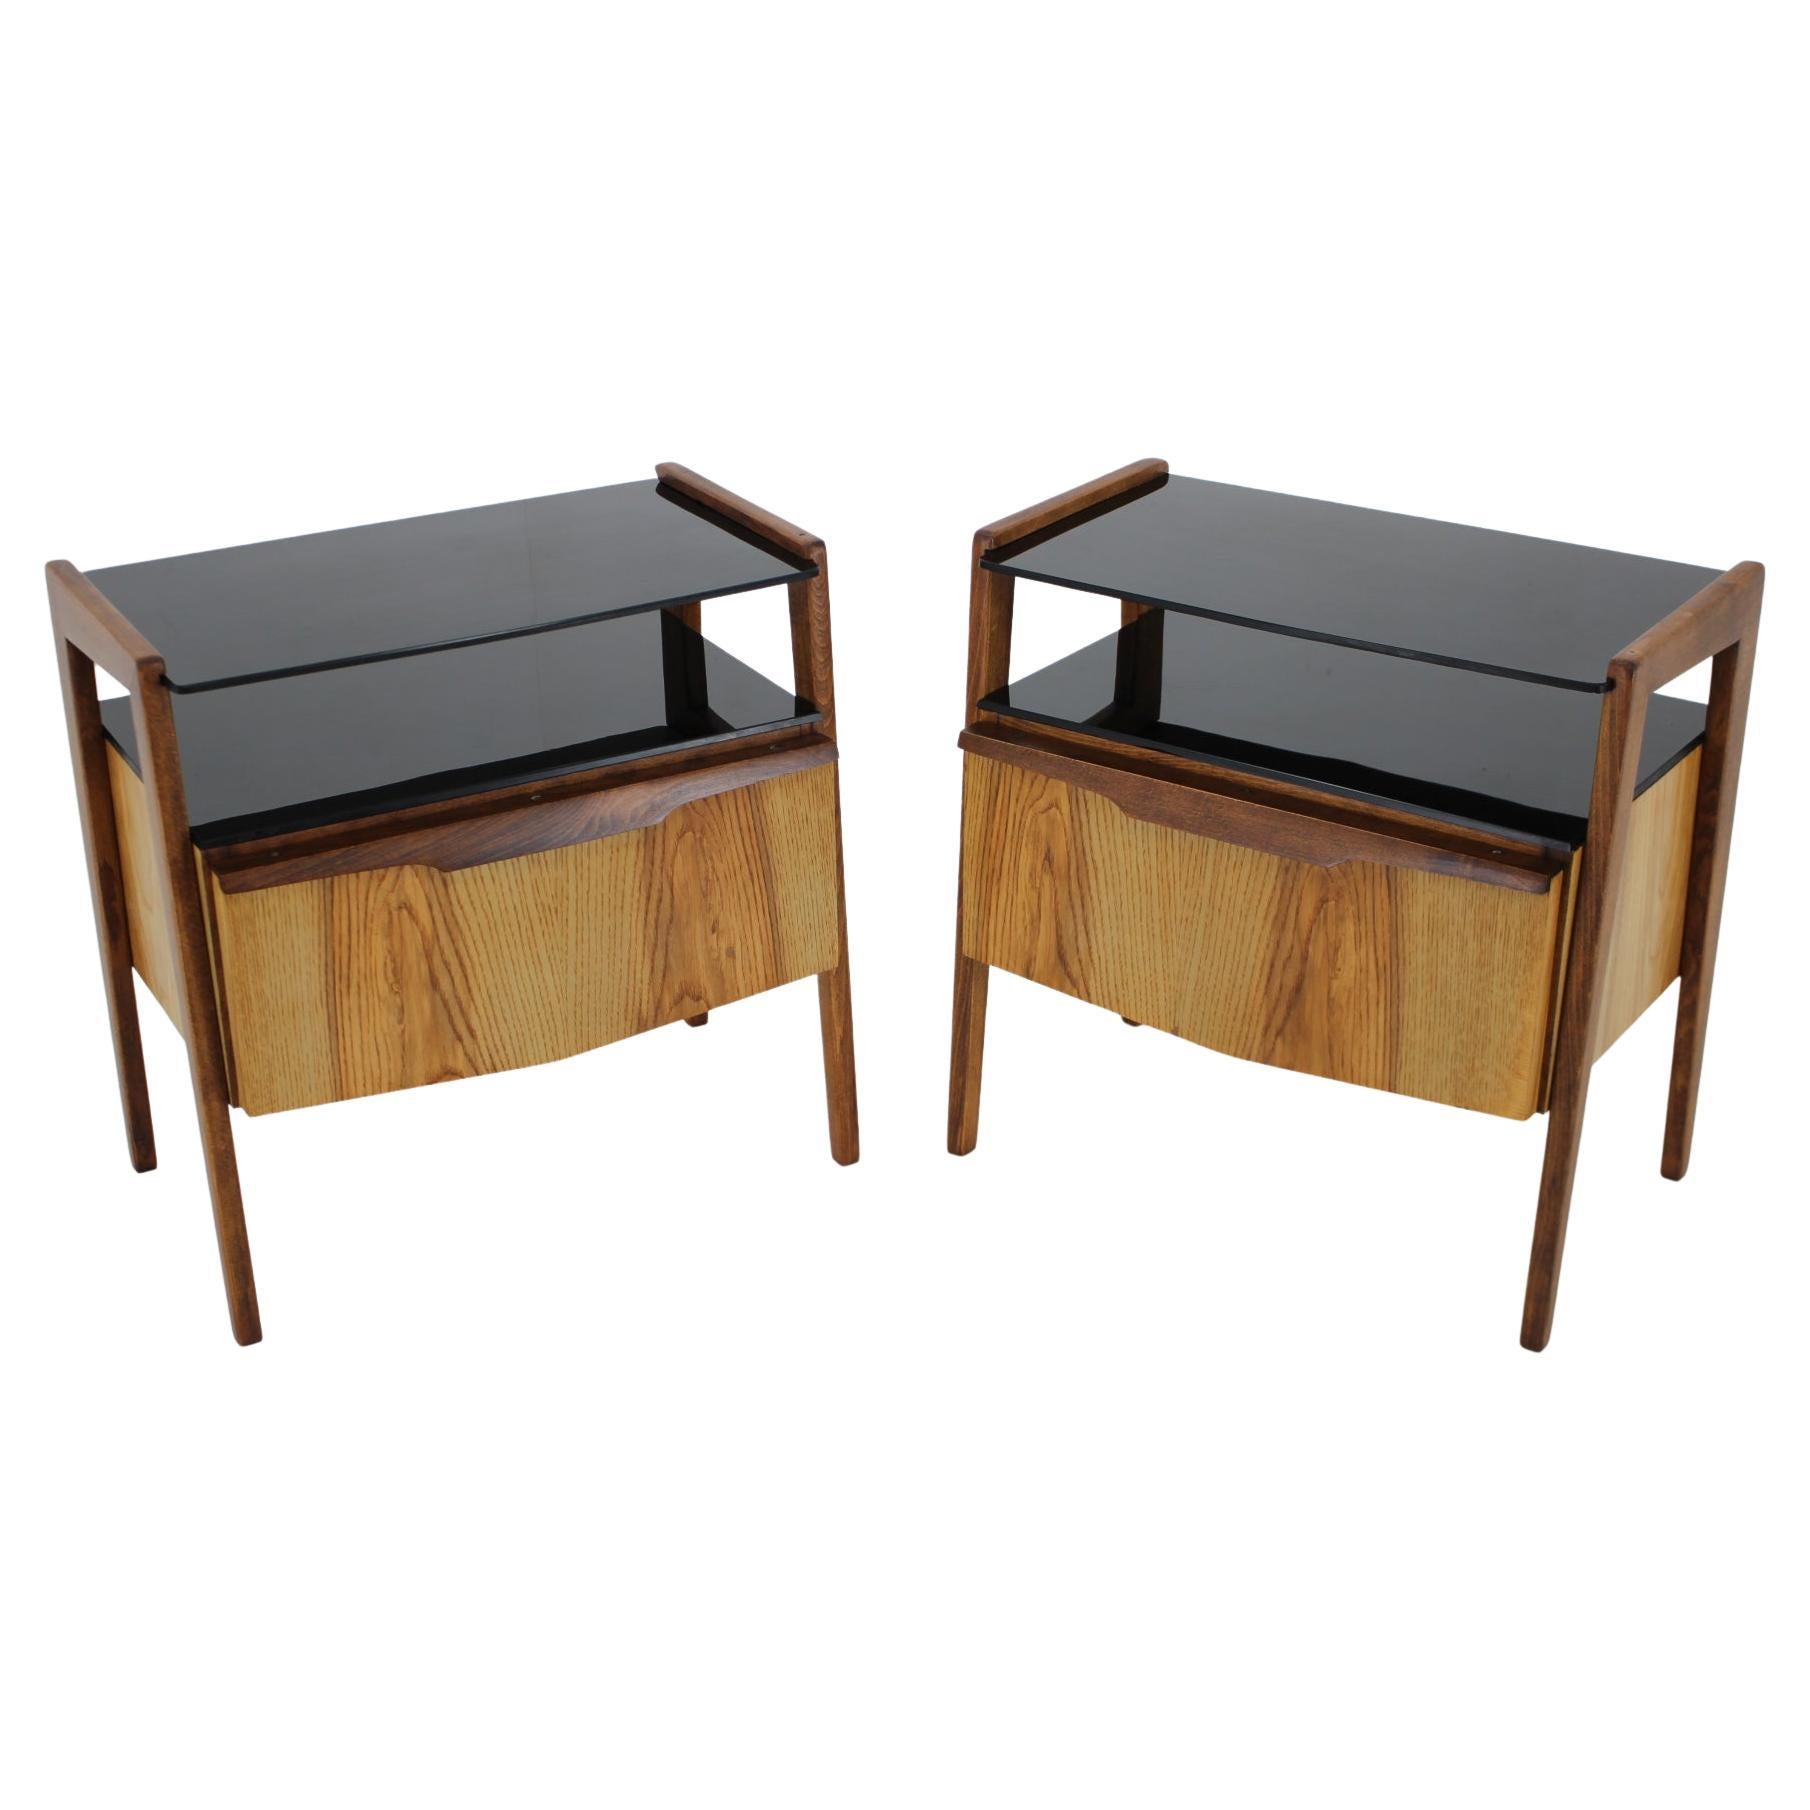 1960s Pair of Restored Bedside Tables, Czechoslovakia